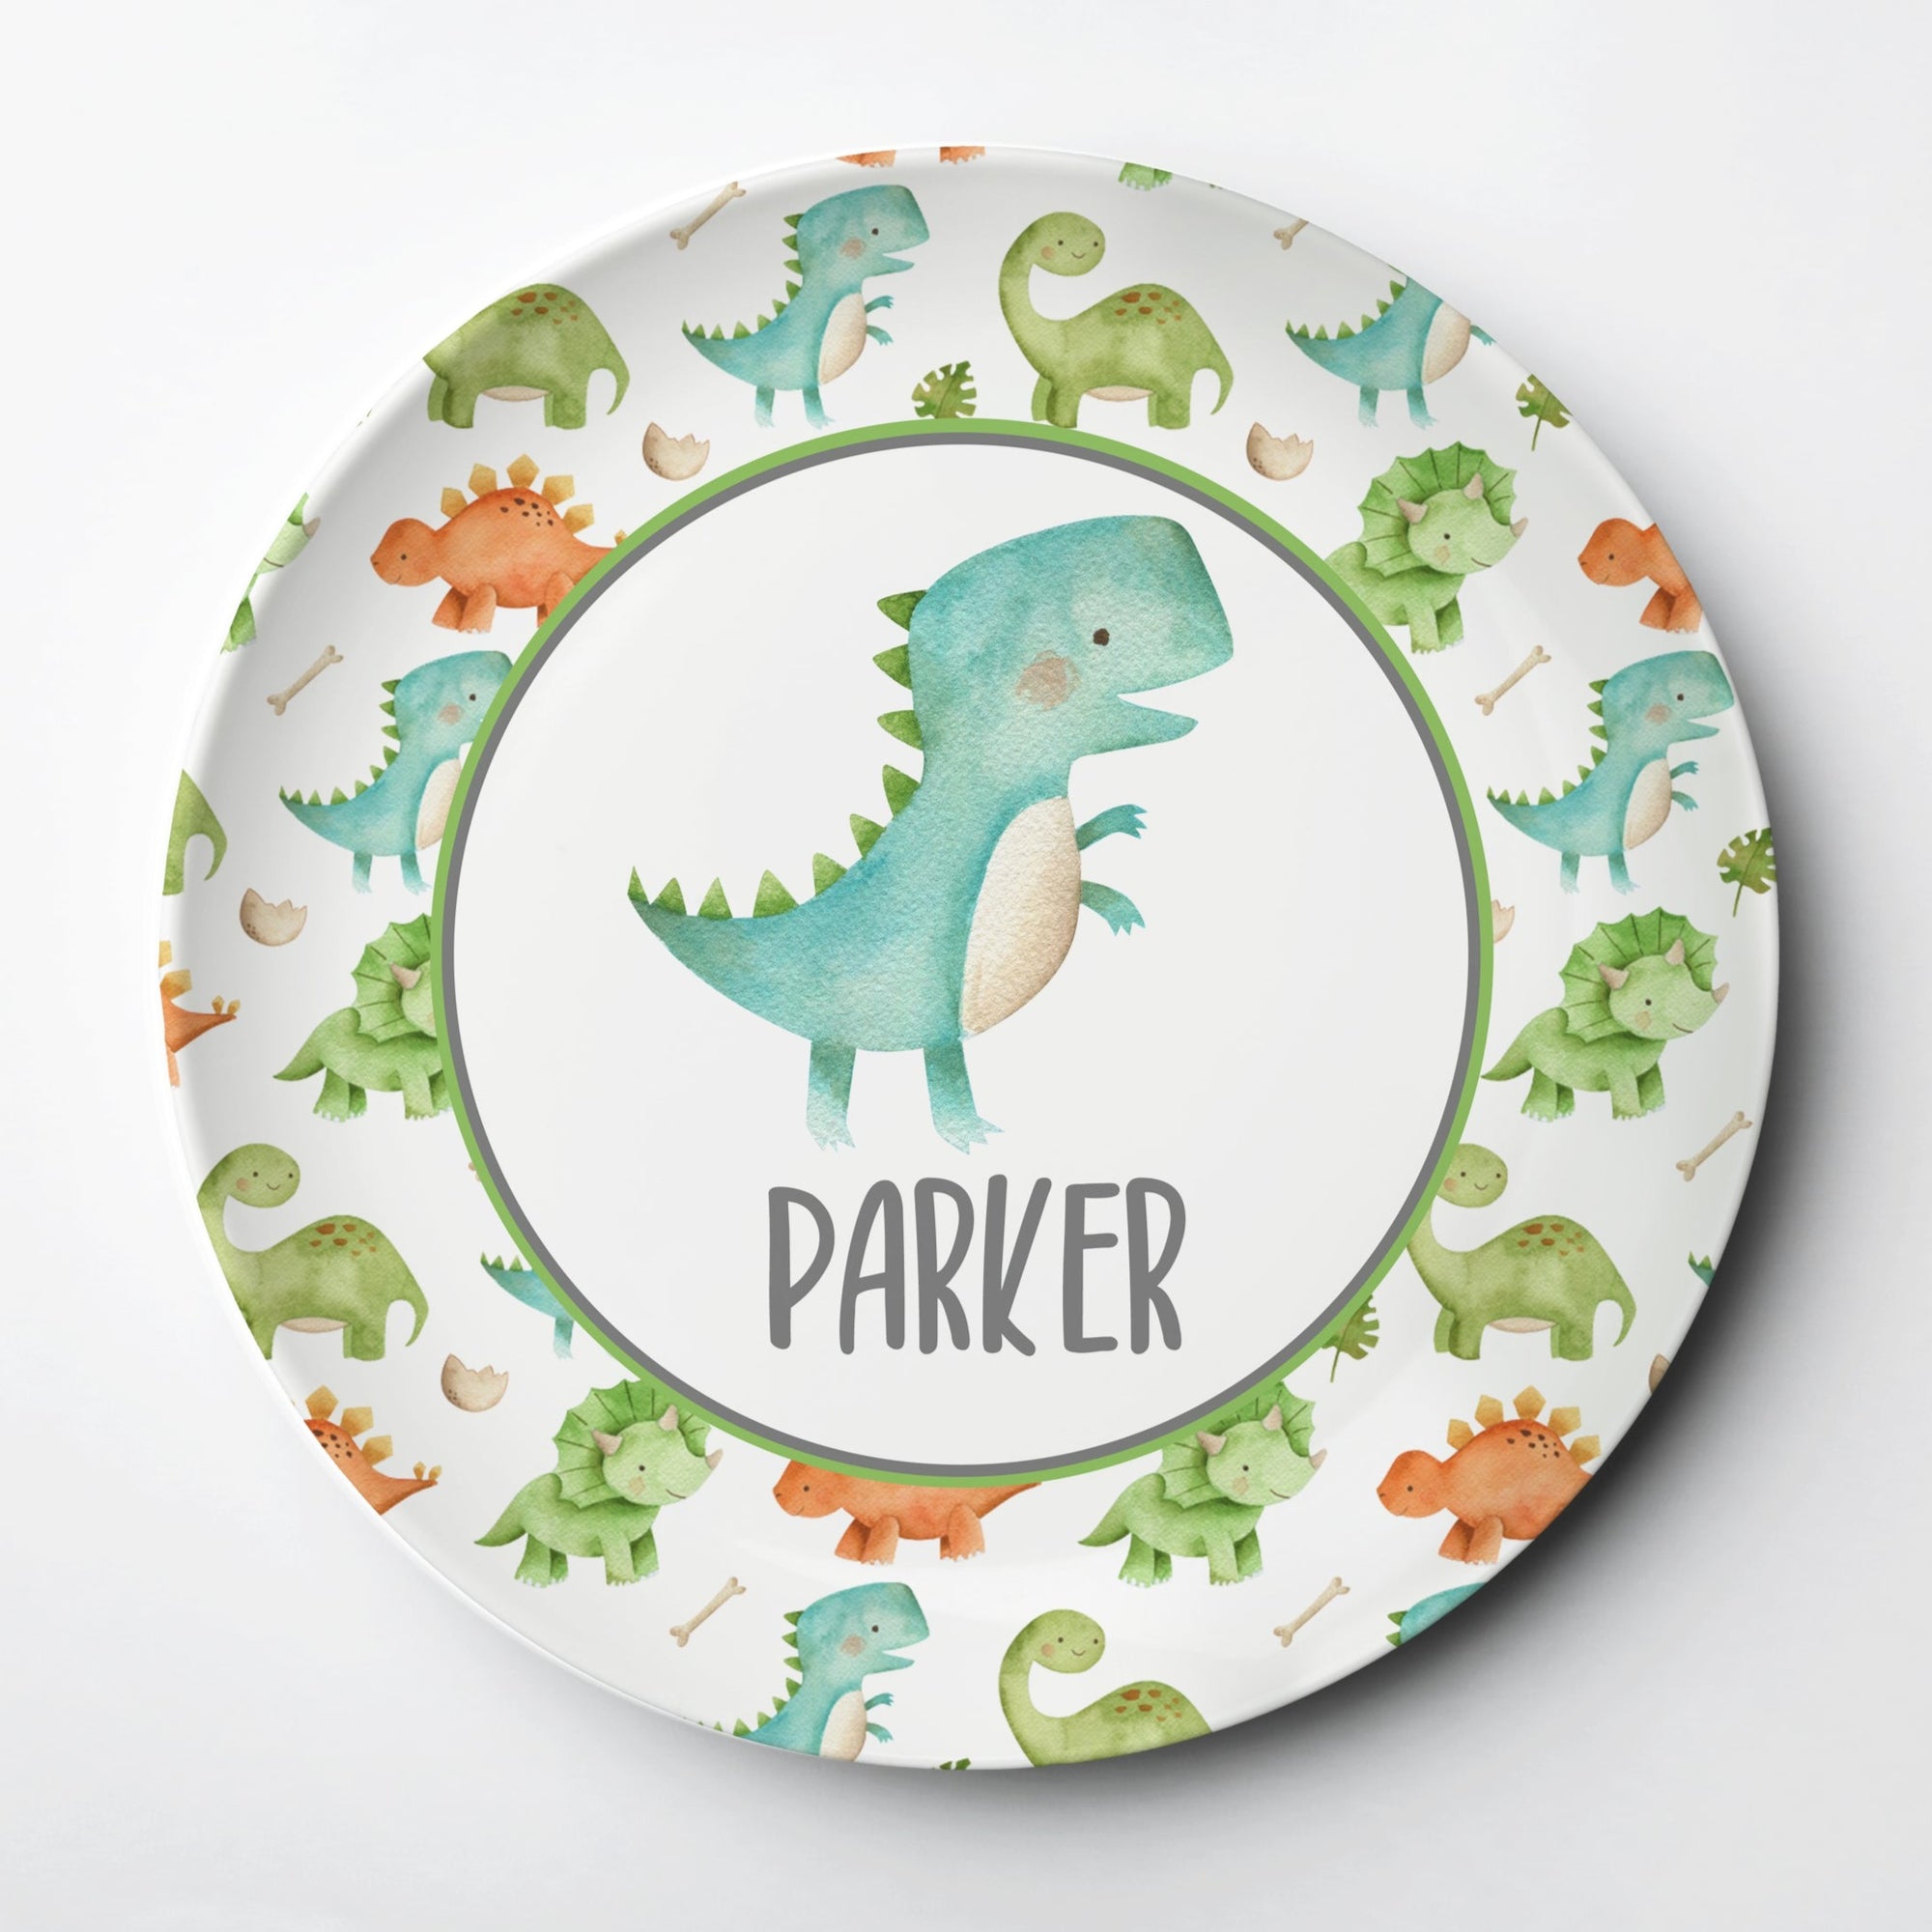 Dinosaur personalized kid plate - 10" diameter, made from ThermoSāf® · Microwave, oven and dishwasher safe (any rack) · BPA, melamine and formaldehyde free · FDA food safe & made in the USA, Pipsy.com